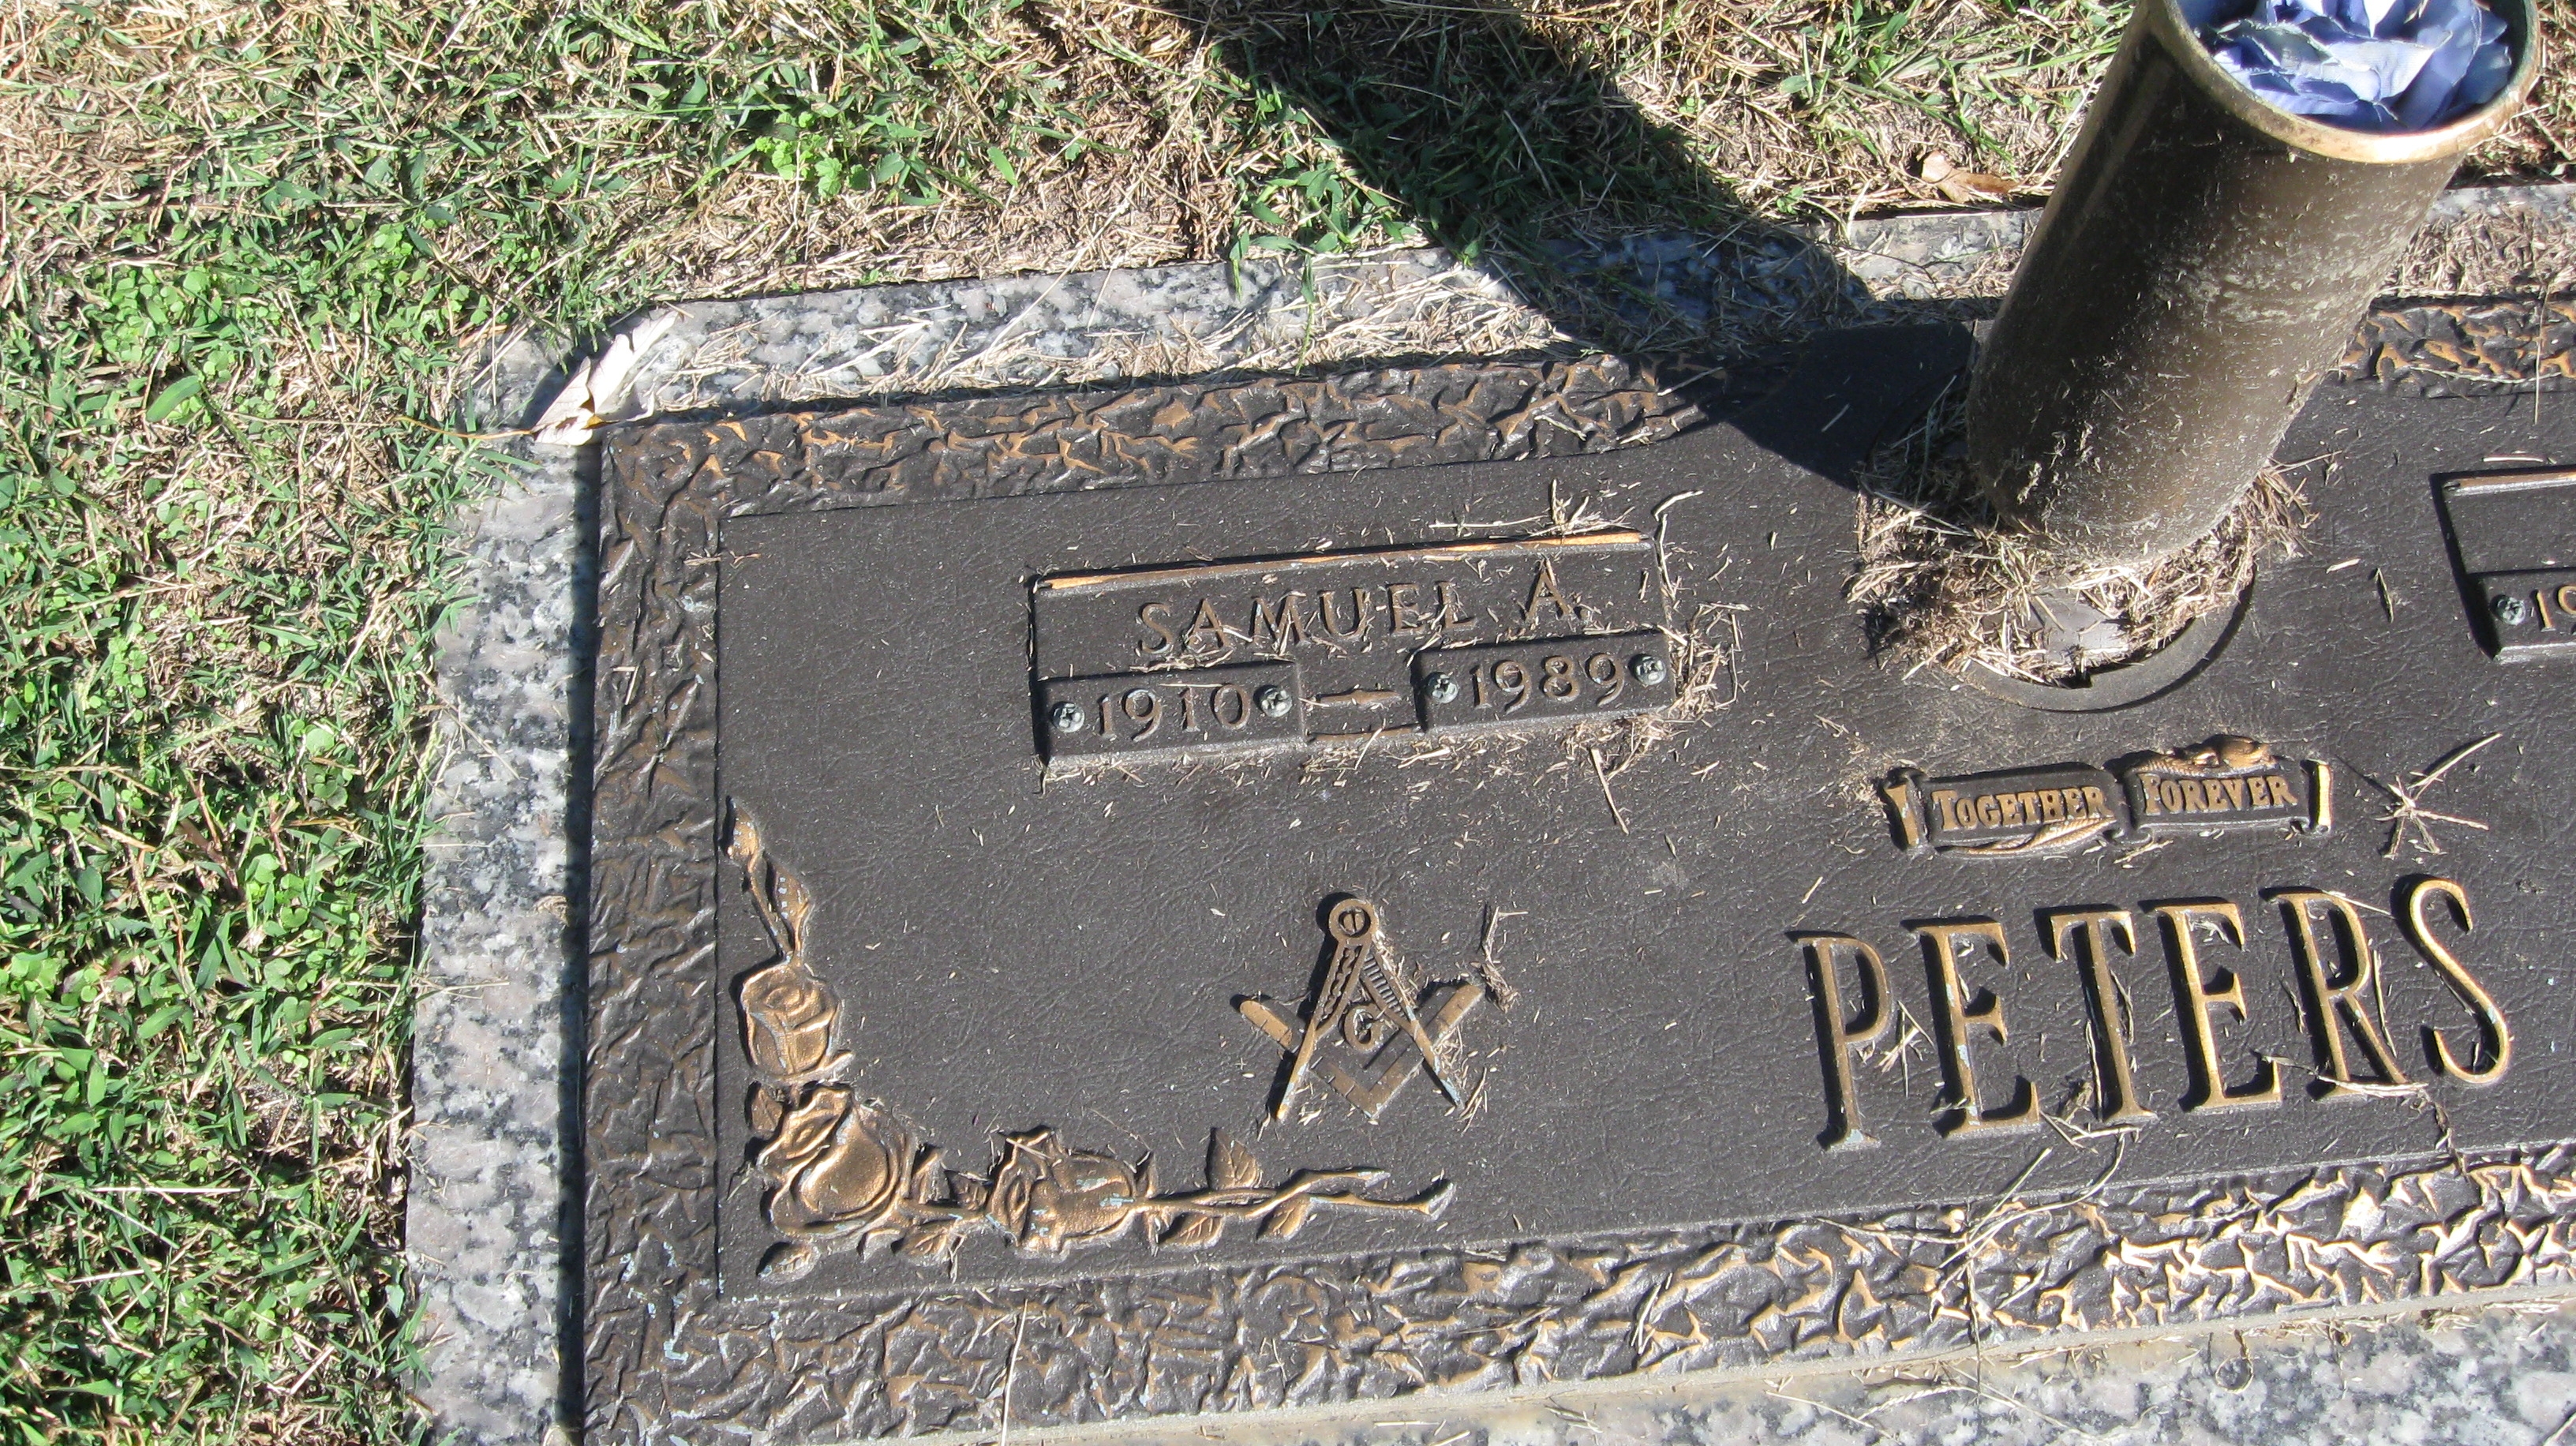 Arthur and Edna Peters Grave